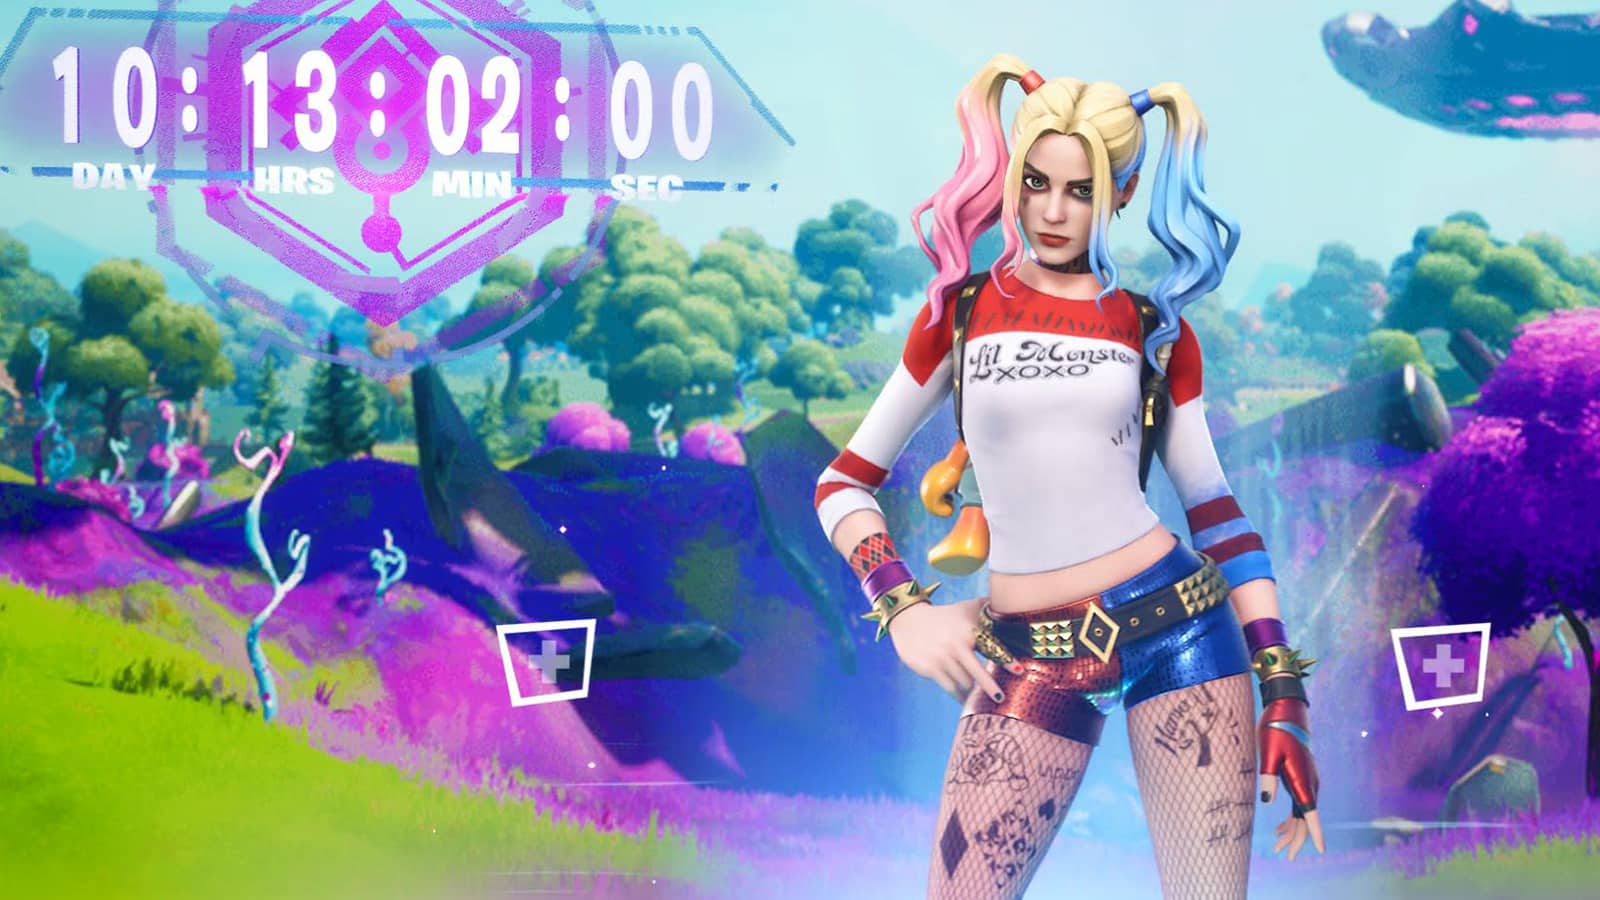 THE LIVE EVENT COUNTDOWN IS NOW IN GAME 🤯 #fortnite #fortnitenews